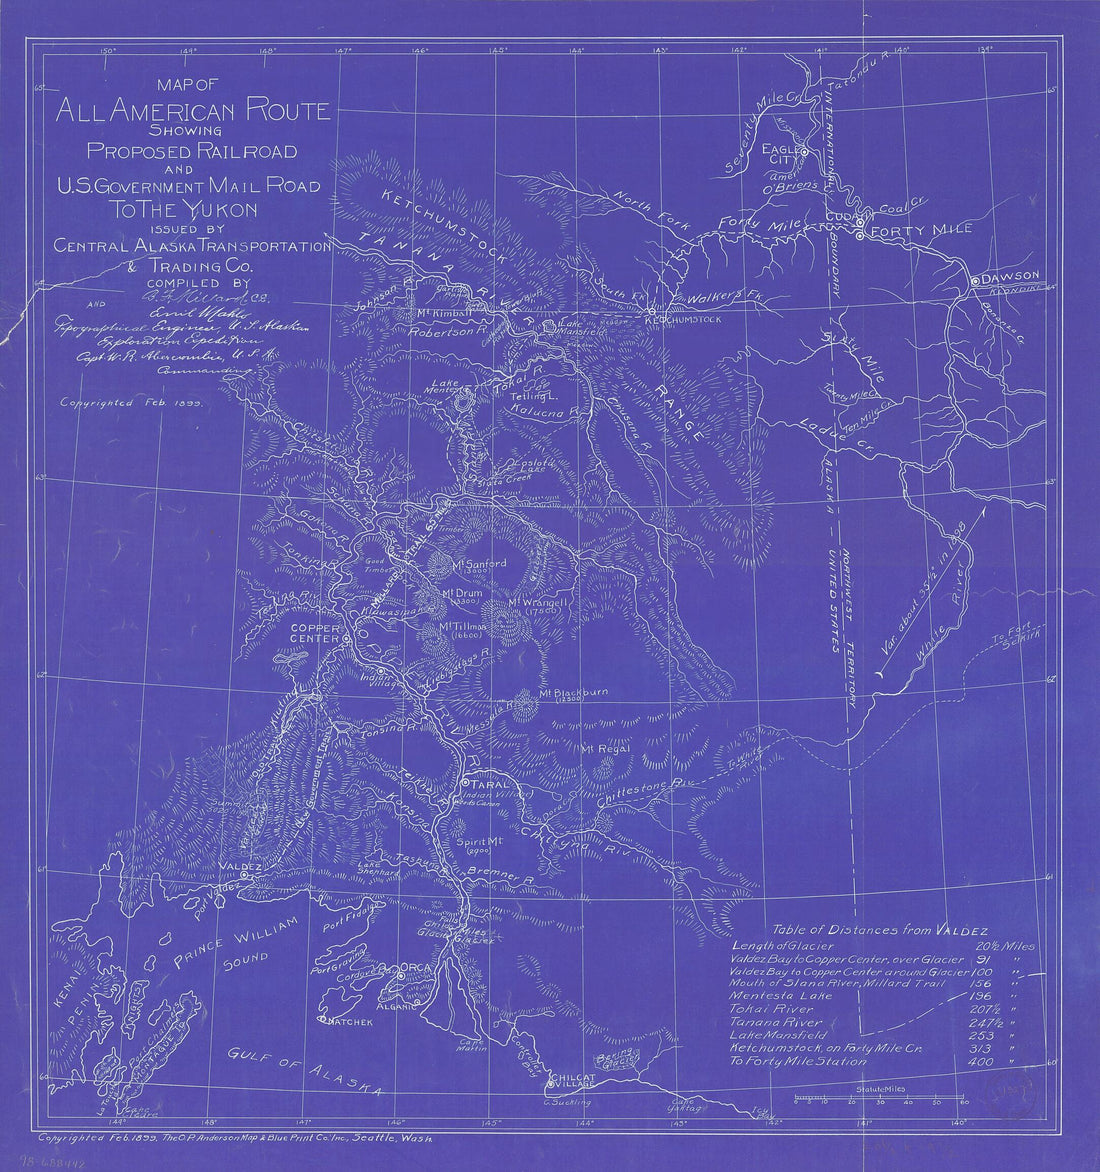 This old map of Map of the All American Route Showing Proposed Railroad and U.S. Government Mail Road to the Yukon; Issued by Central Alaska Transportation &amp; Trading Co.; Compiled by B. F. Millard and Emil Mahlo, Topographical Engineer, U.S. Alaska Explo